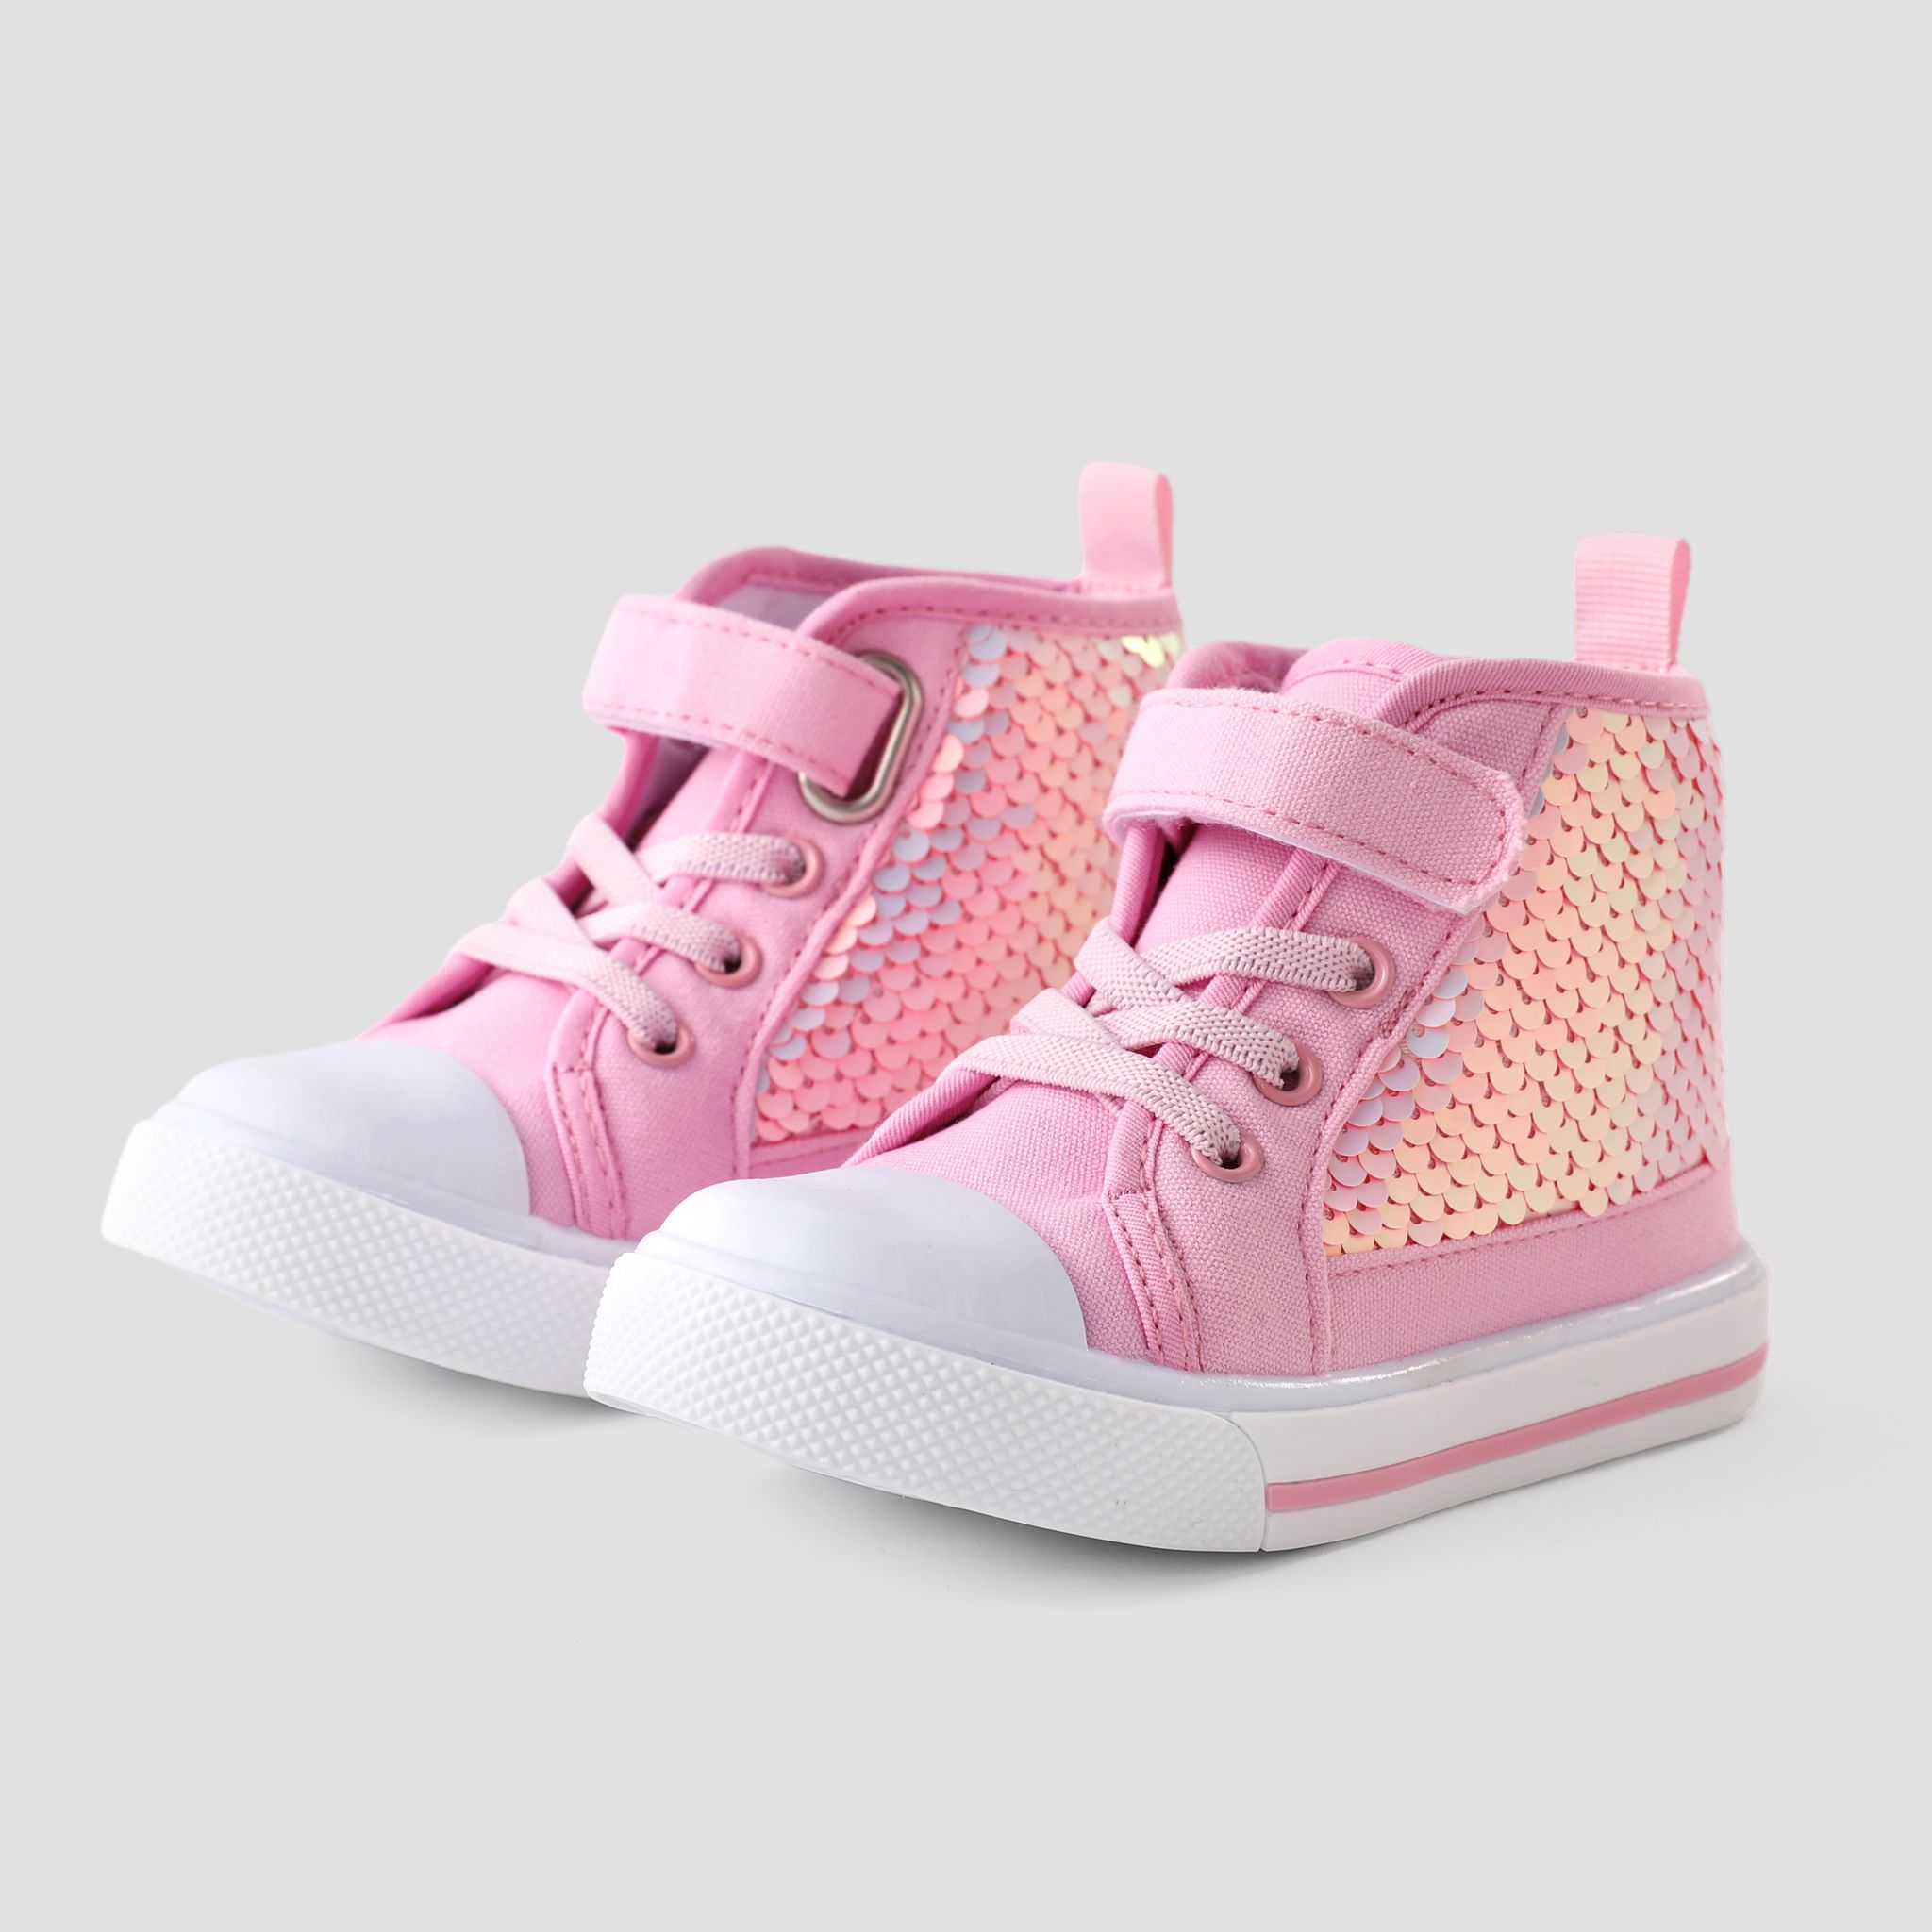 Toddler & Kids Girls Solid Color Glitter Design High Top Velcro Casual Shoes